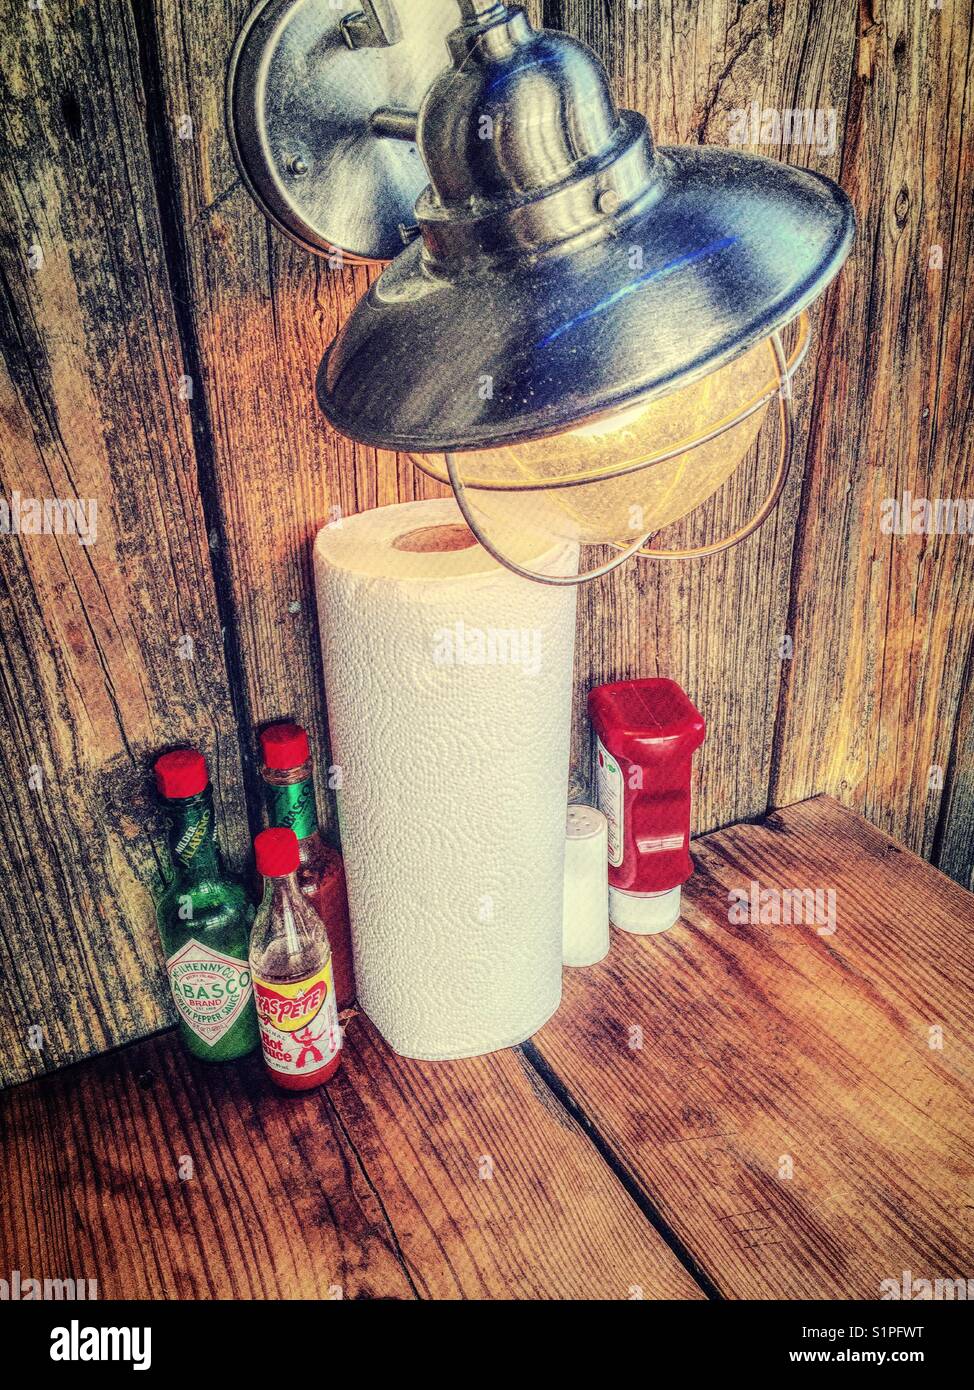 Condiments and roll of paper towels on the table of a casual seafood restaurant, South Carolina, USA Stock Photo